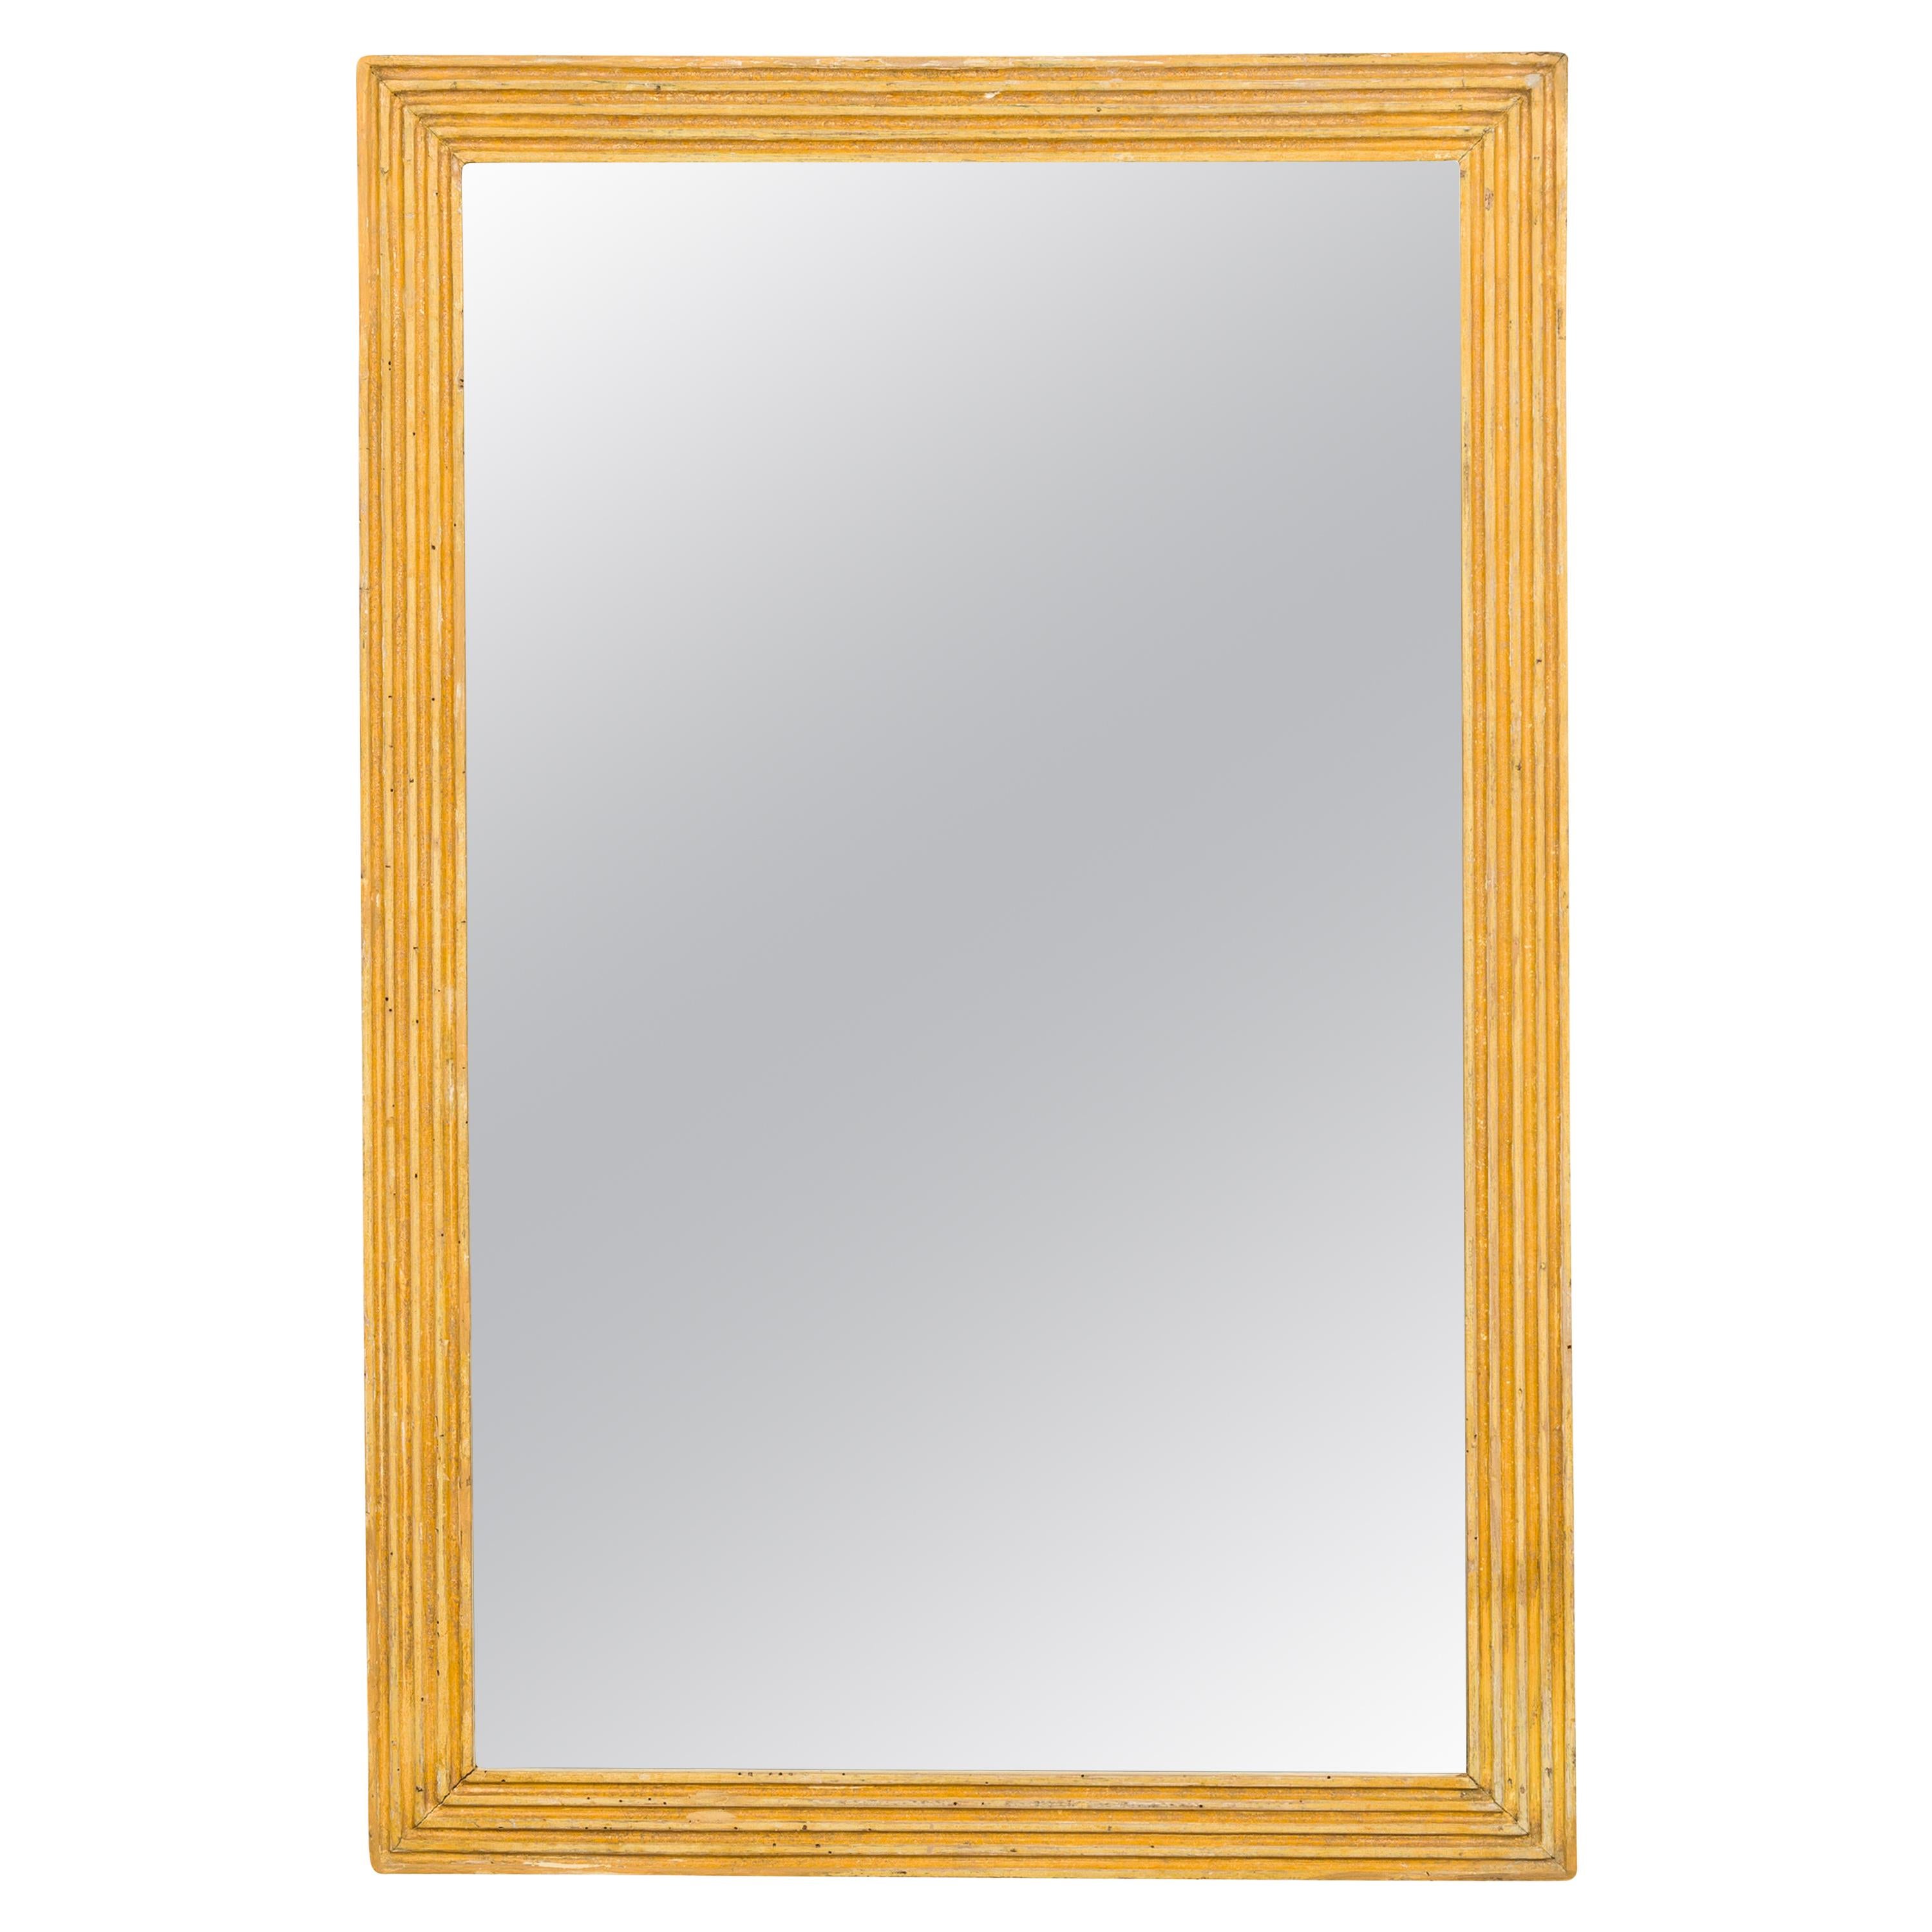 French Turn of the Century Gilt Mirror with Reeded Frame, circa 1900